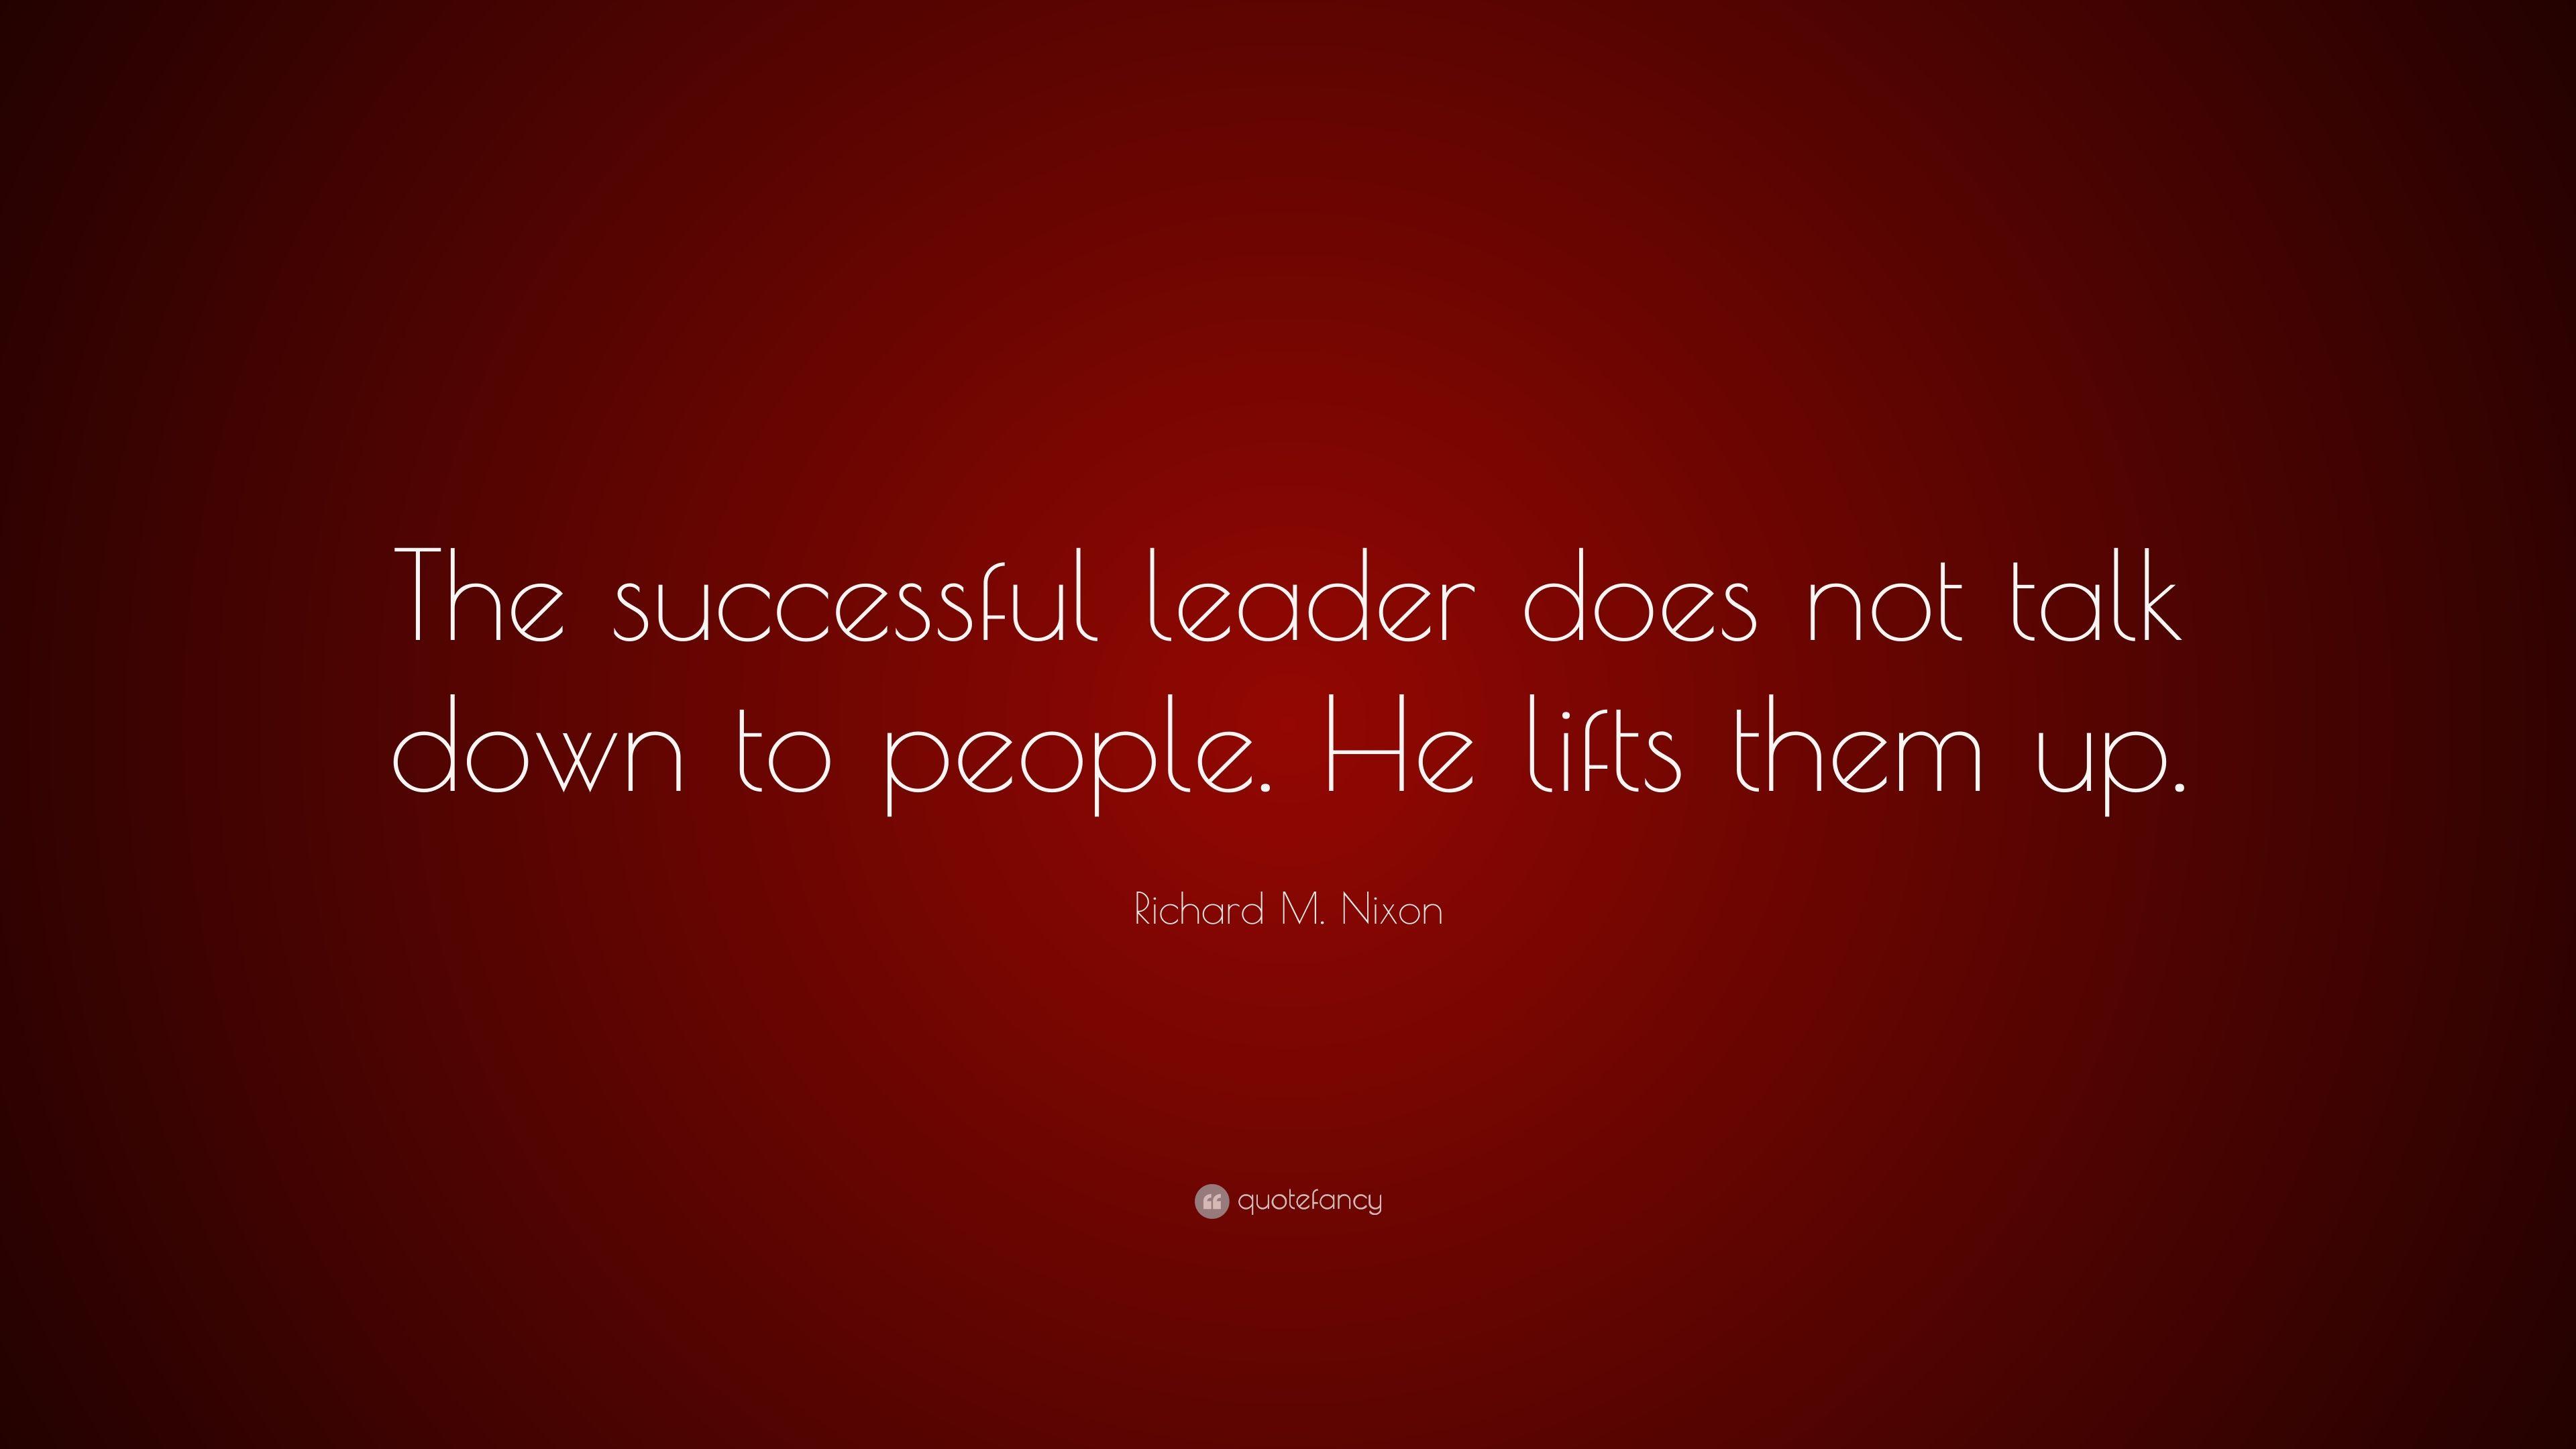 Richard M. Nixon Quote: “The successful leader does not talk down to